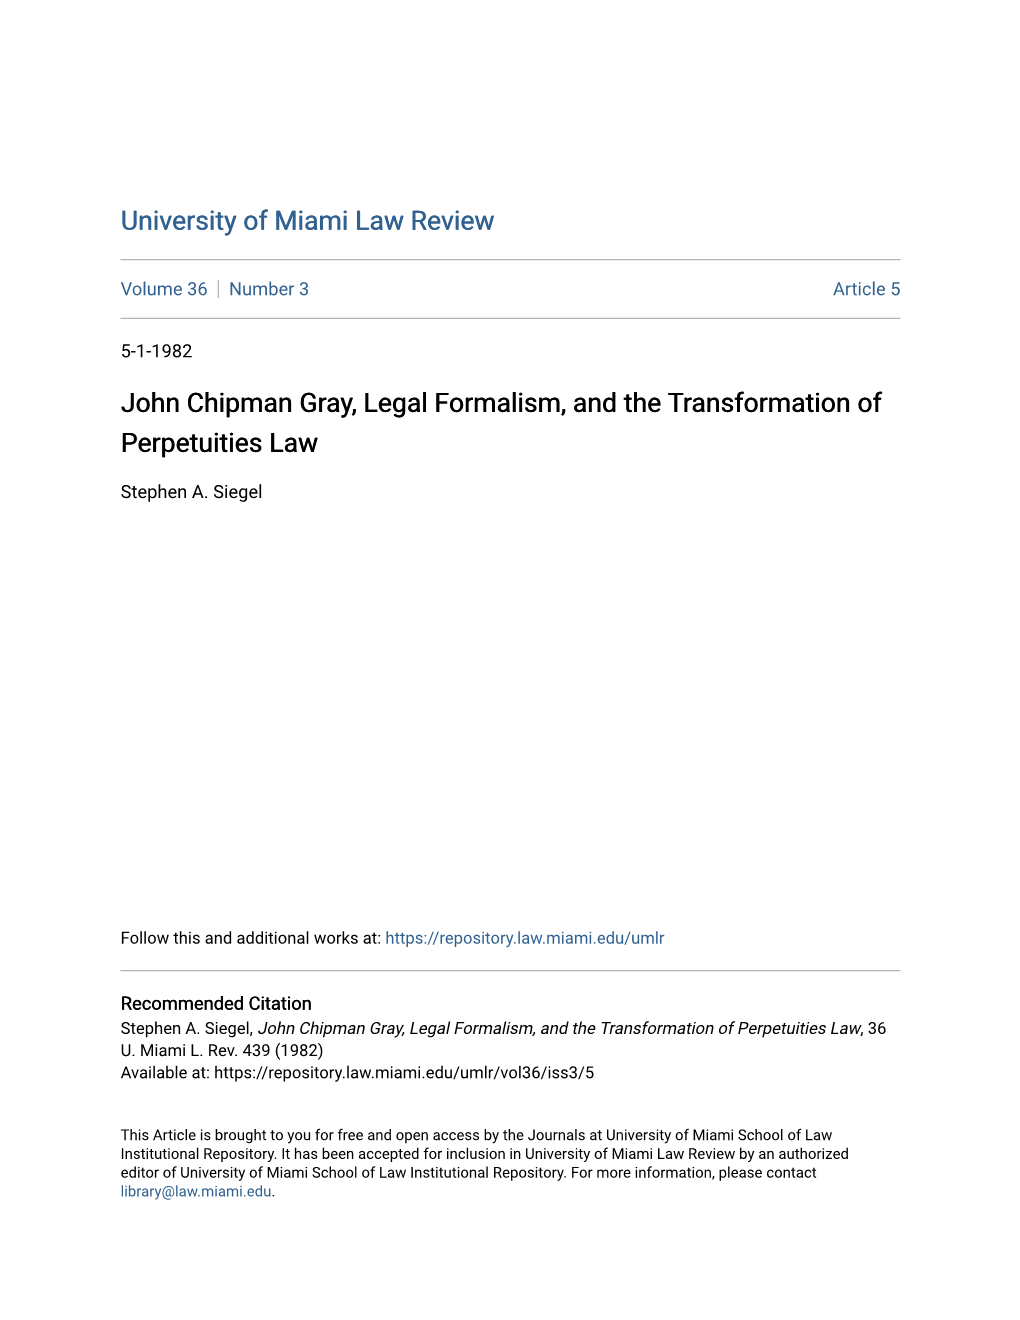 John Chipman Gray, Legal Formalism, and the Transformation of Perpetuities Law